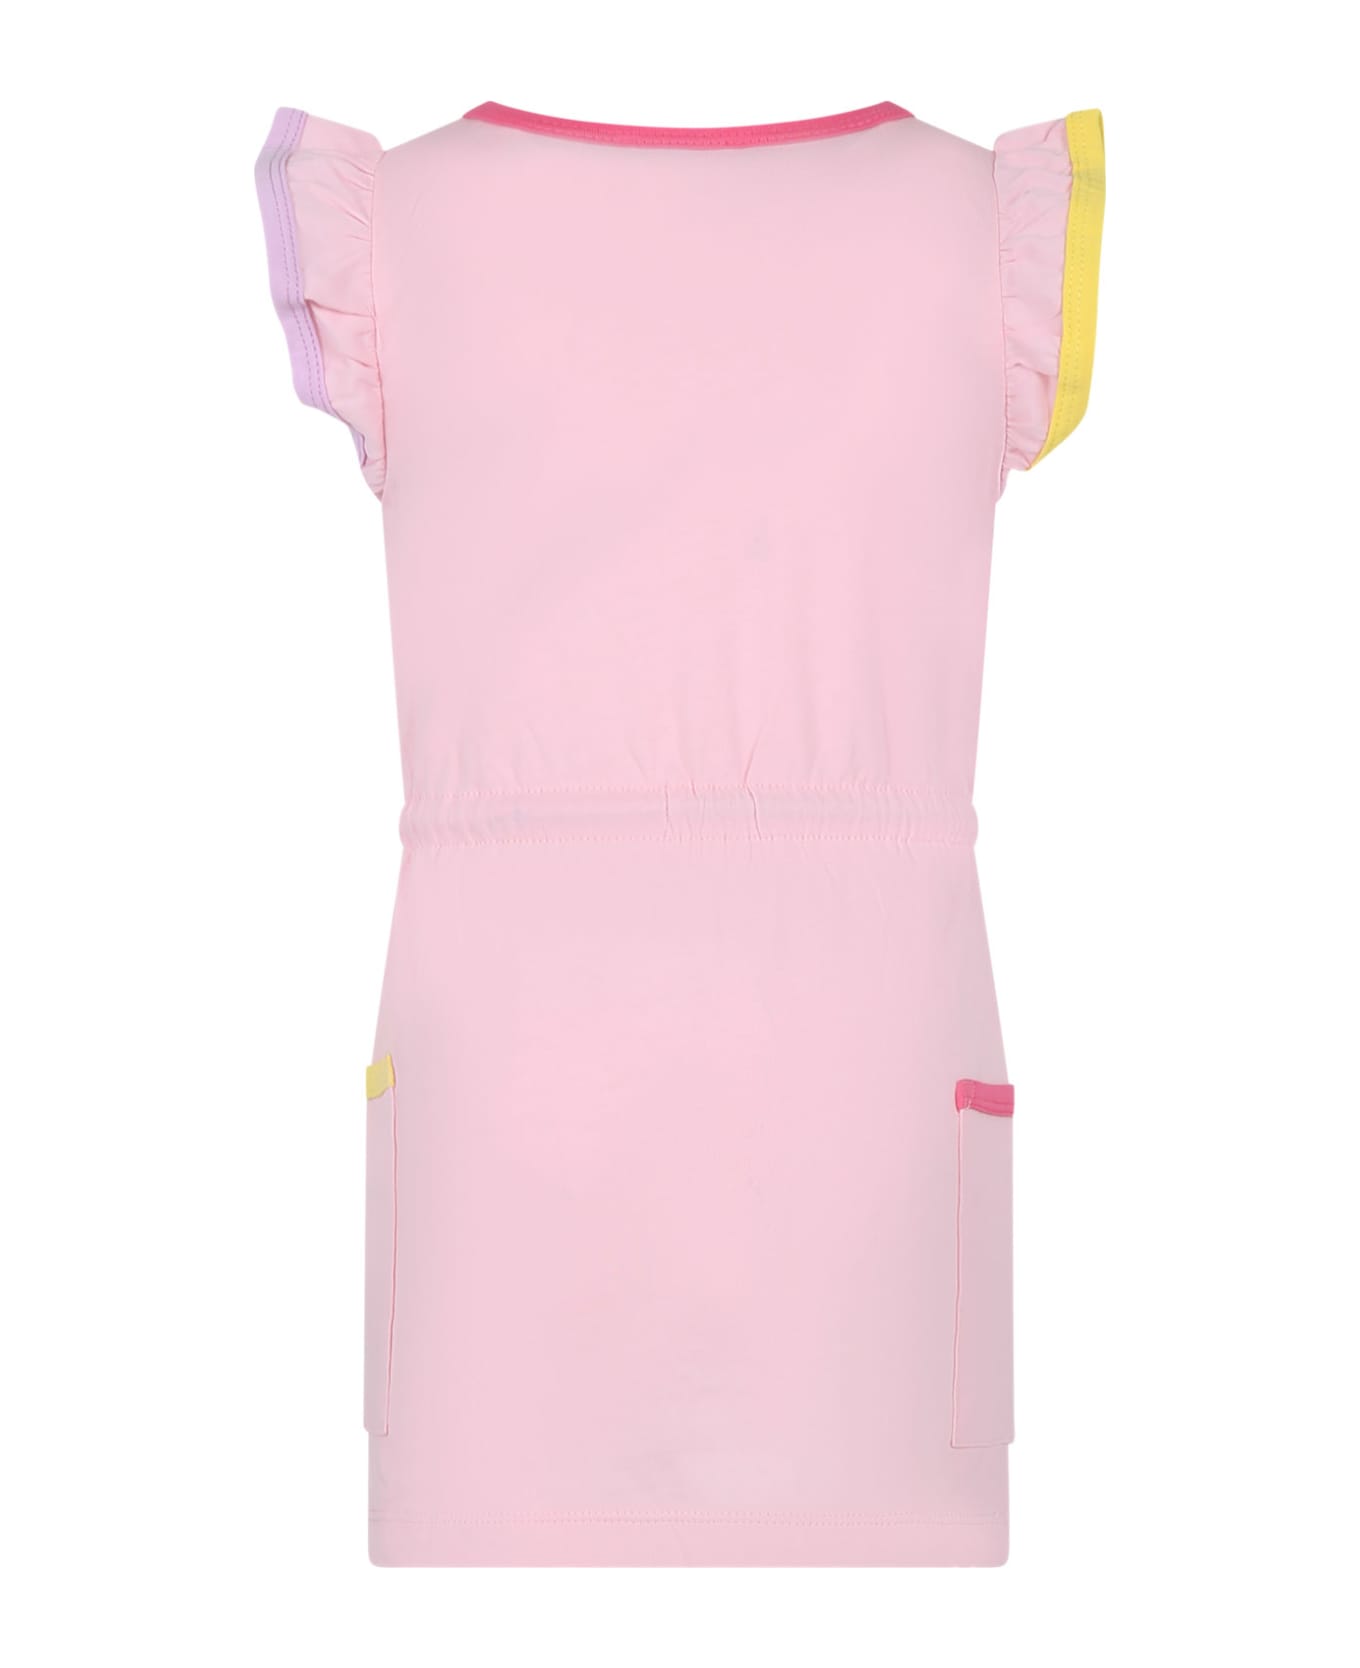 Rykiel Enfant Pink Dress For Girl With Logo And Heart - Pink